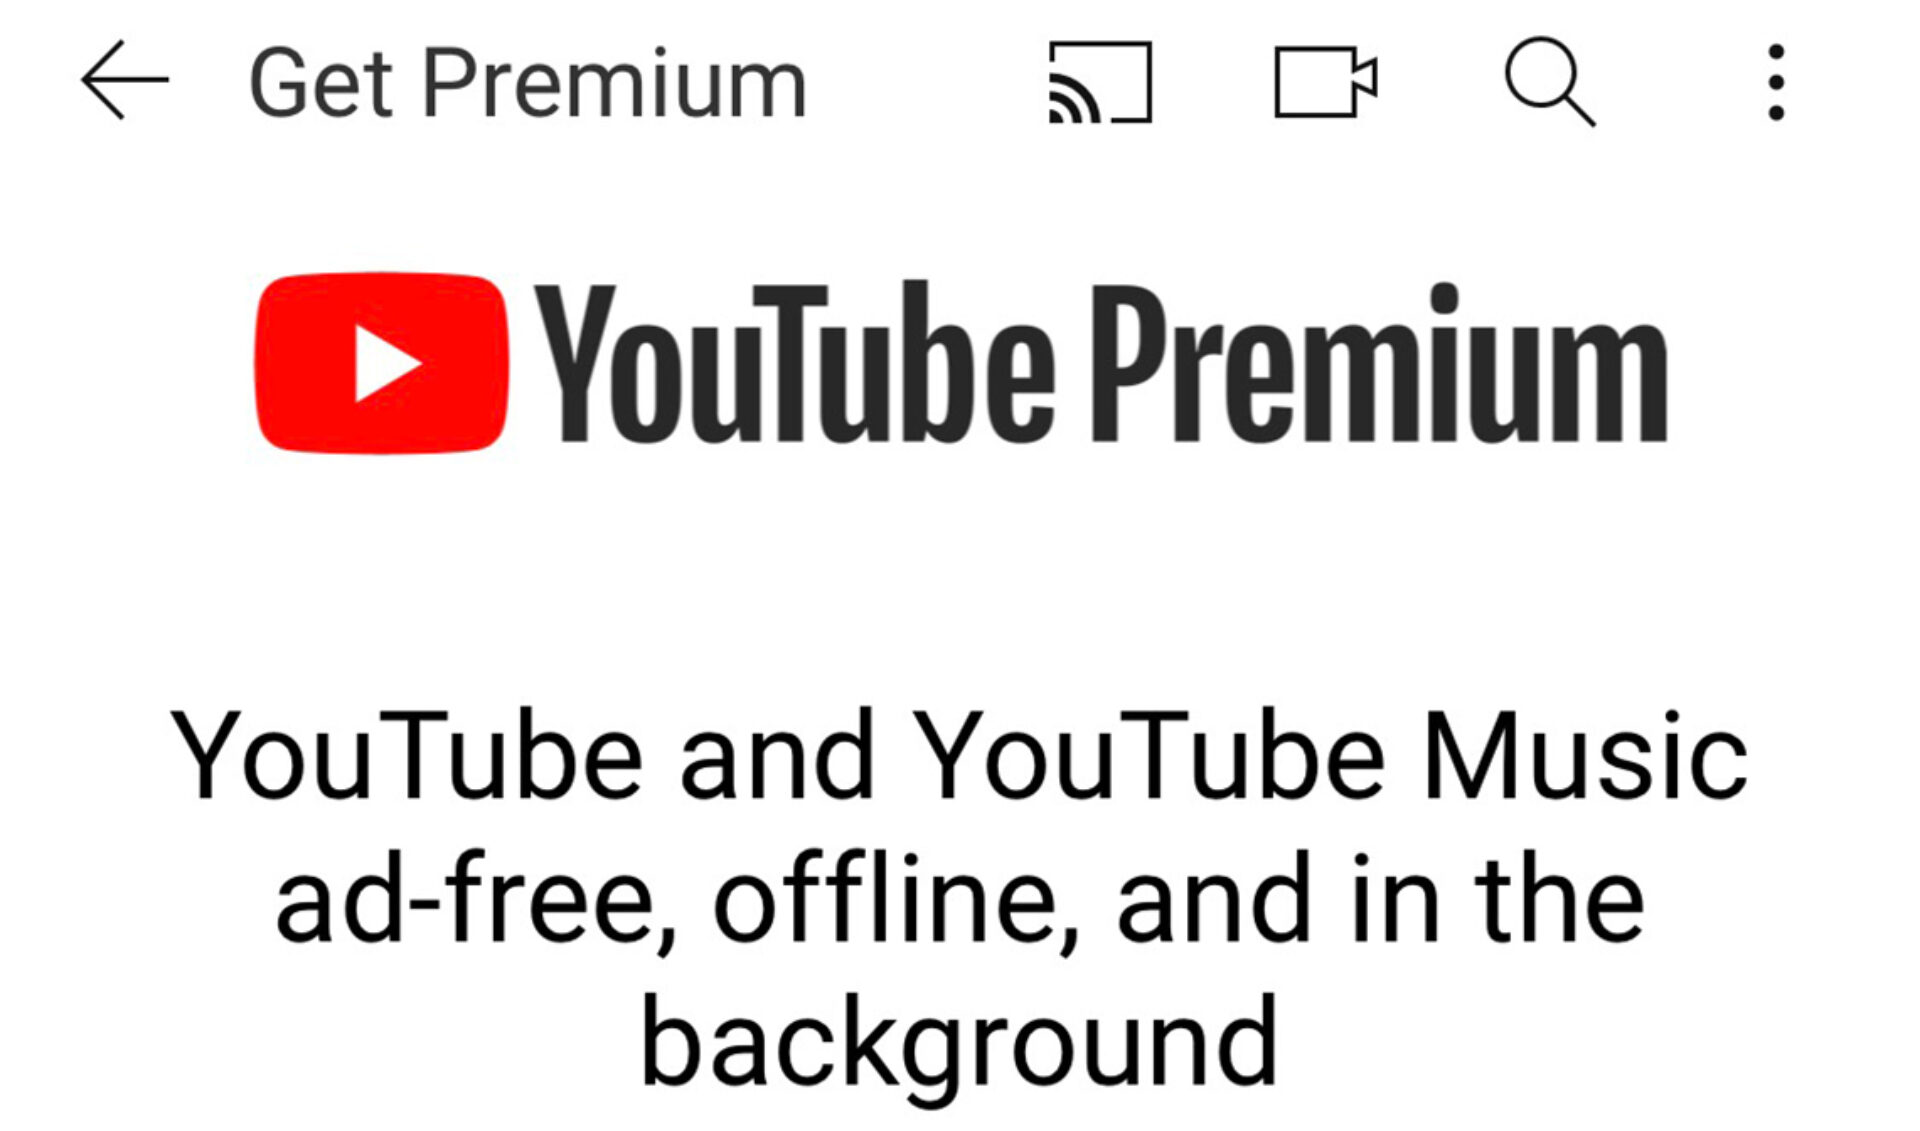 YouTube Piloting Cheaper ‘Premium Lite’ Option In Europe For Ad-Free Viewing